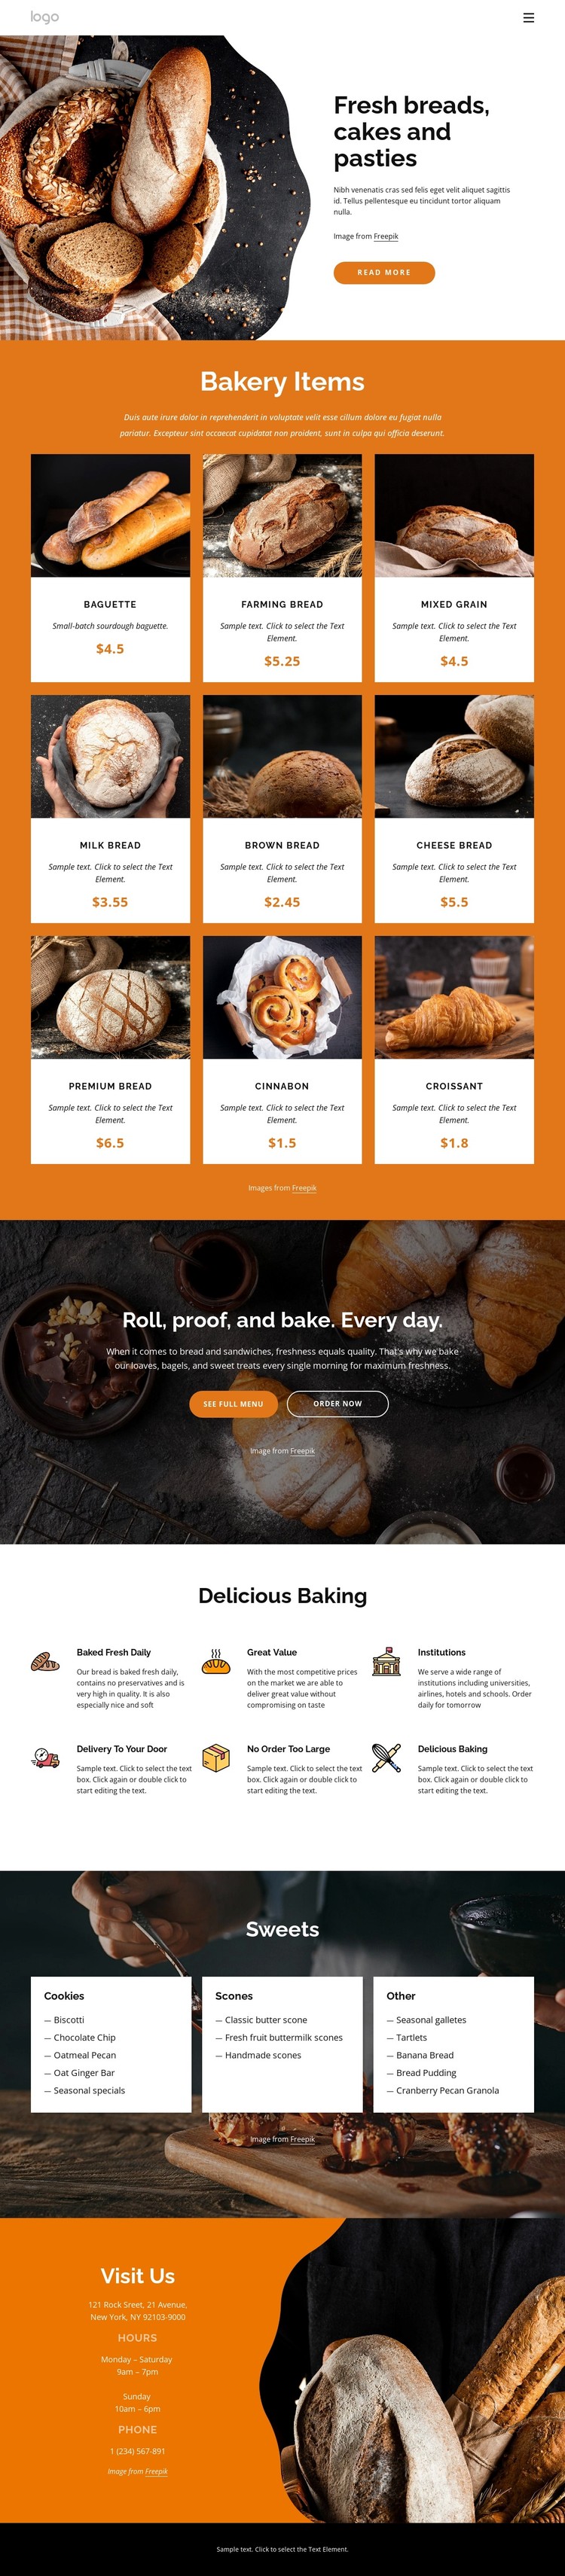 Fresh breads and cakes Static Site Generator